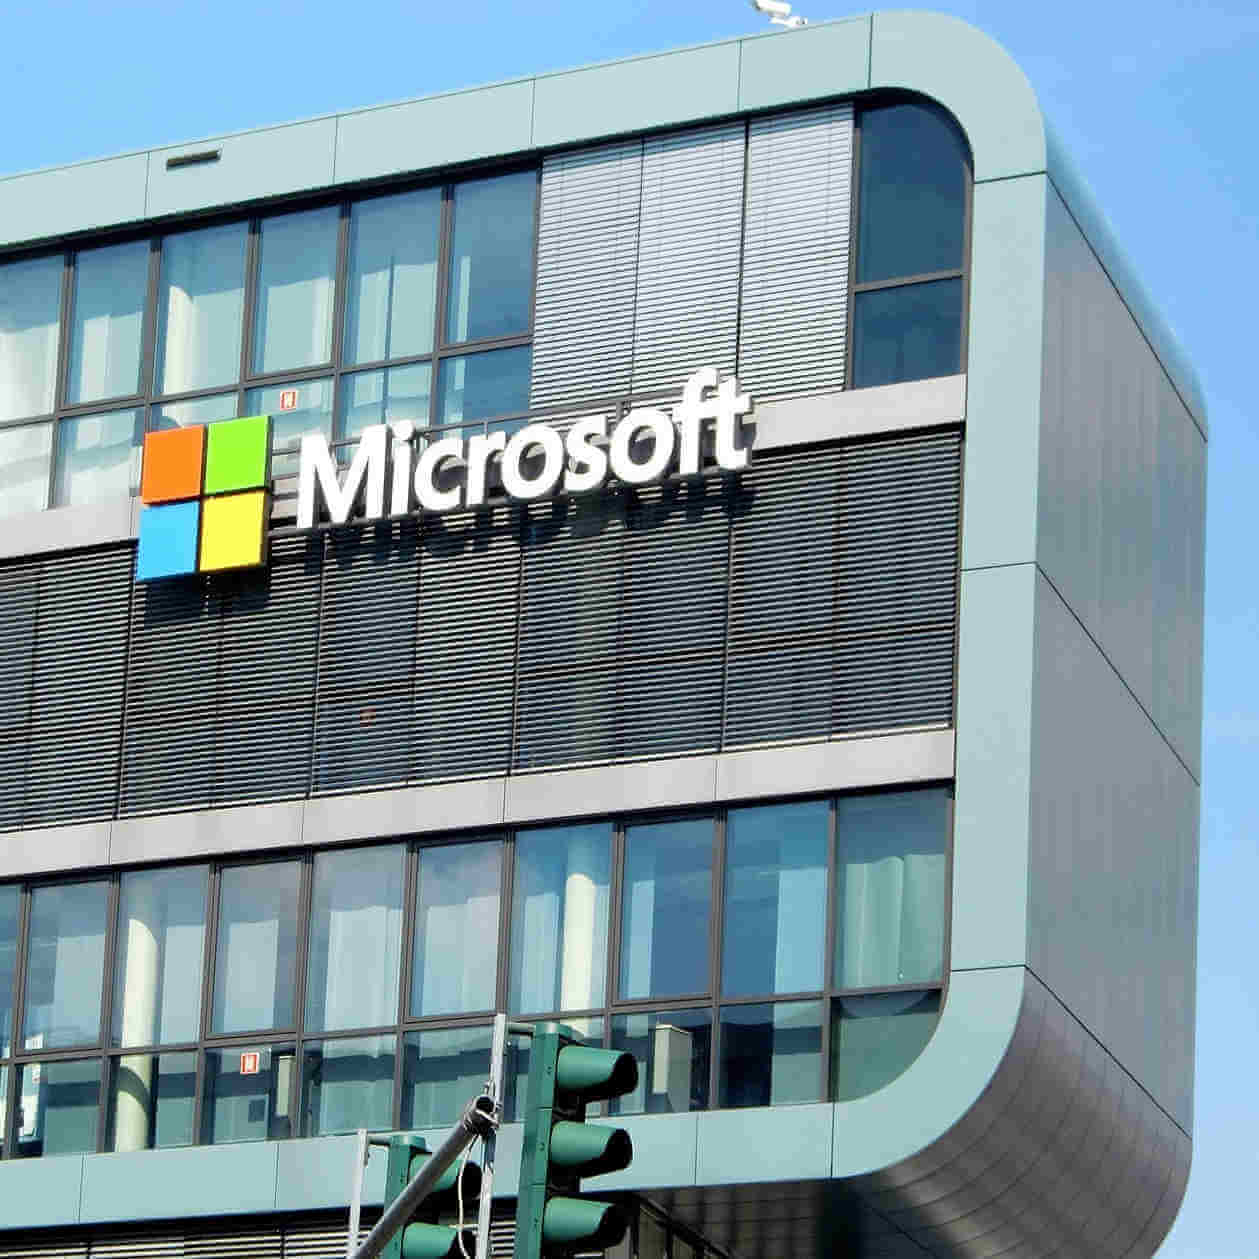 Microsoft's Q4 earnings and 2020 expectations are through the roof